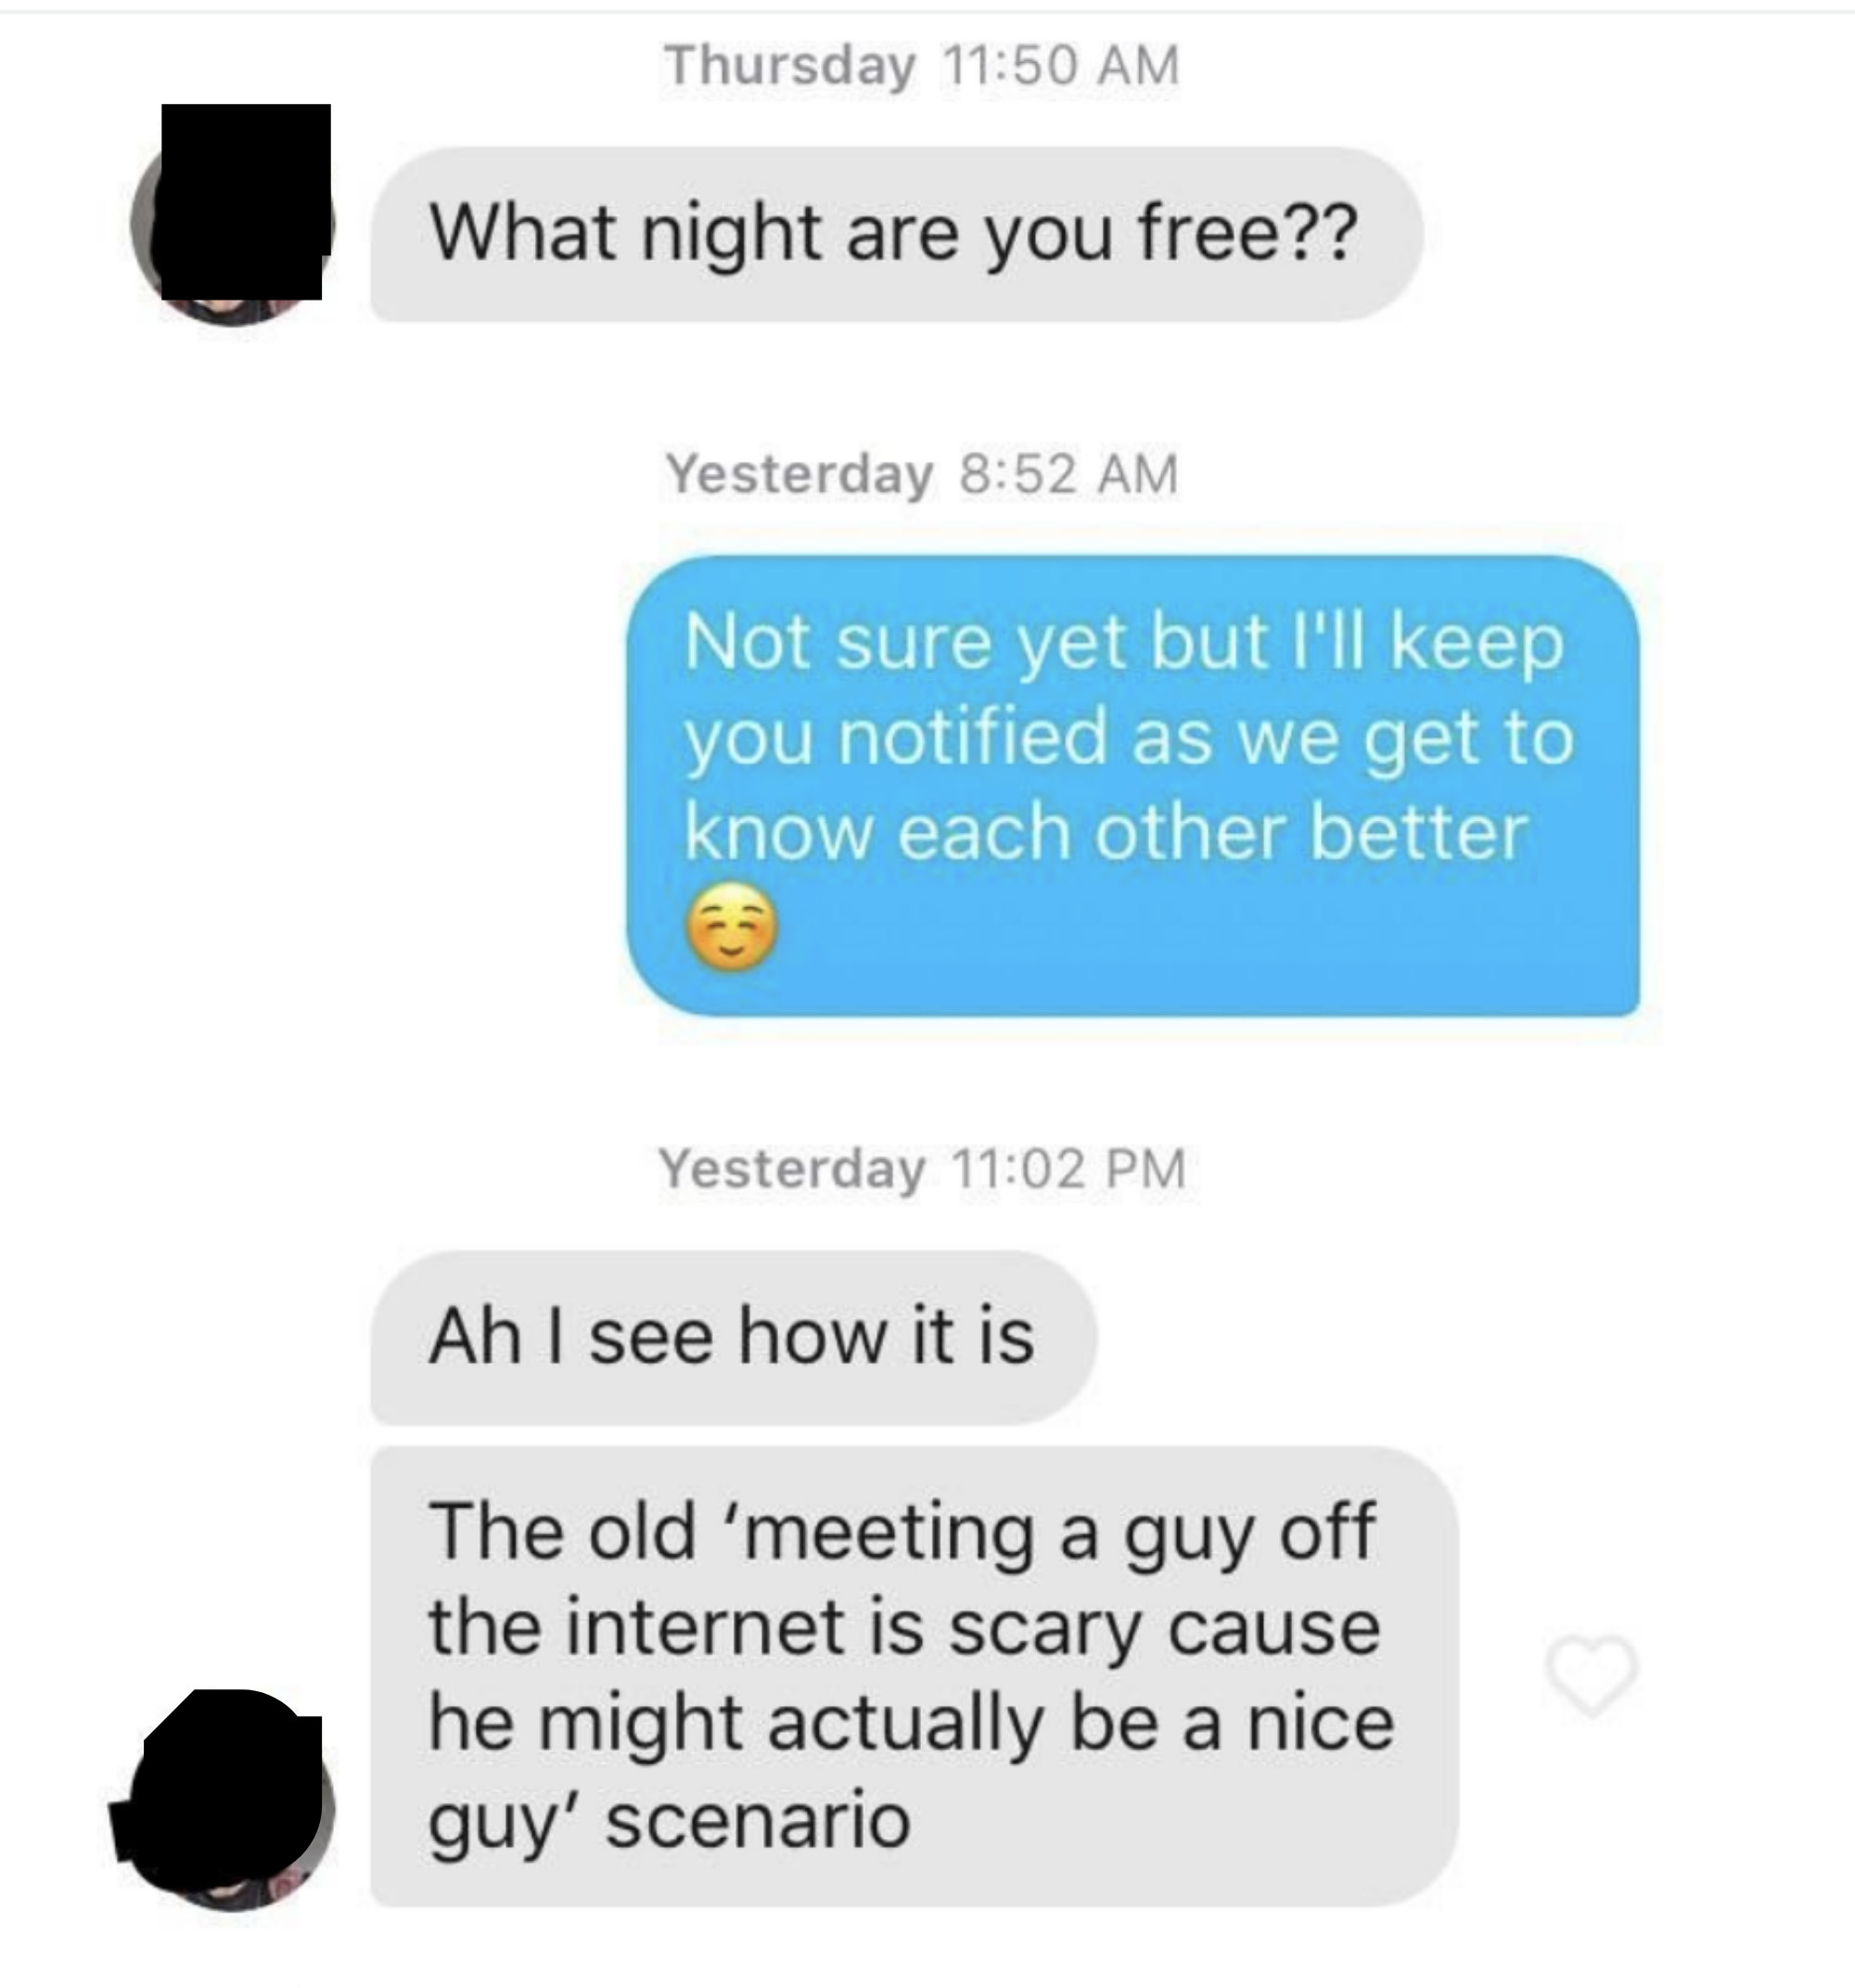 A man asks what night his match his free, she says she&#x27;s not sure yet but will let him know, and he responds &quot;Ah, I see how it is, the old meeting a guy off the internet is scary because he might actually be a nice guy scenario&quot;